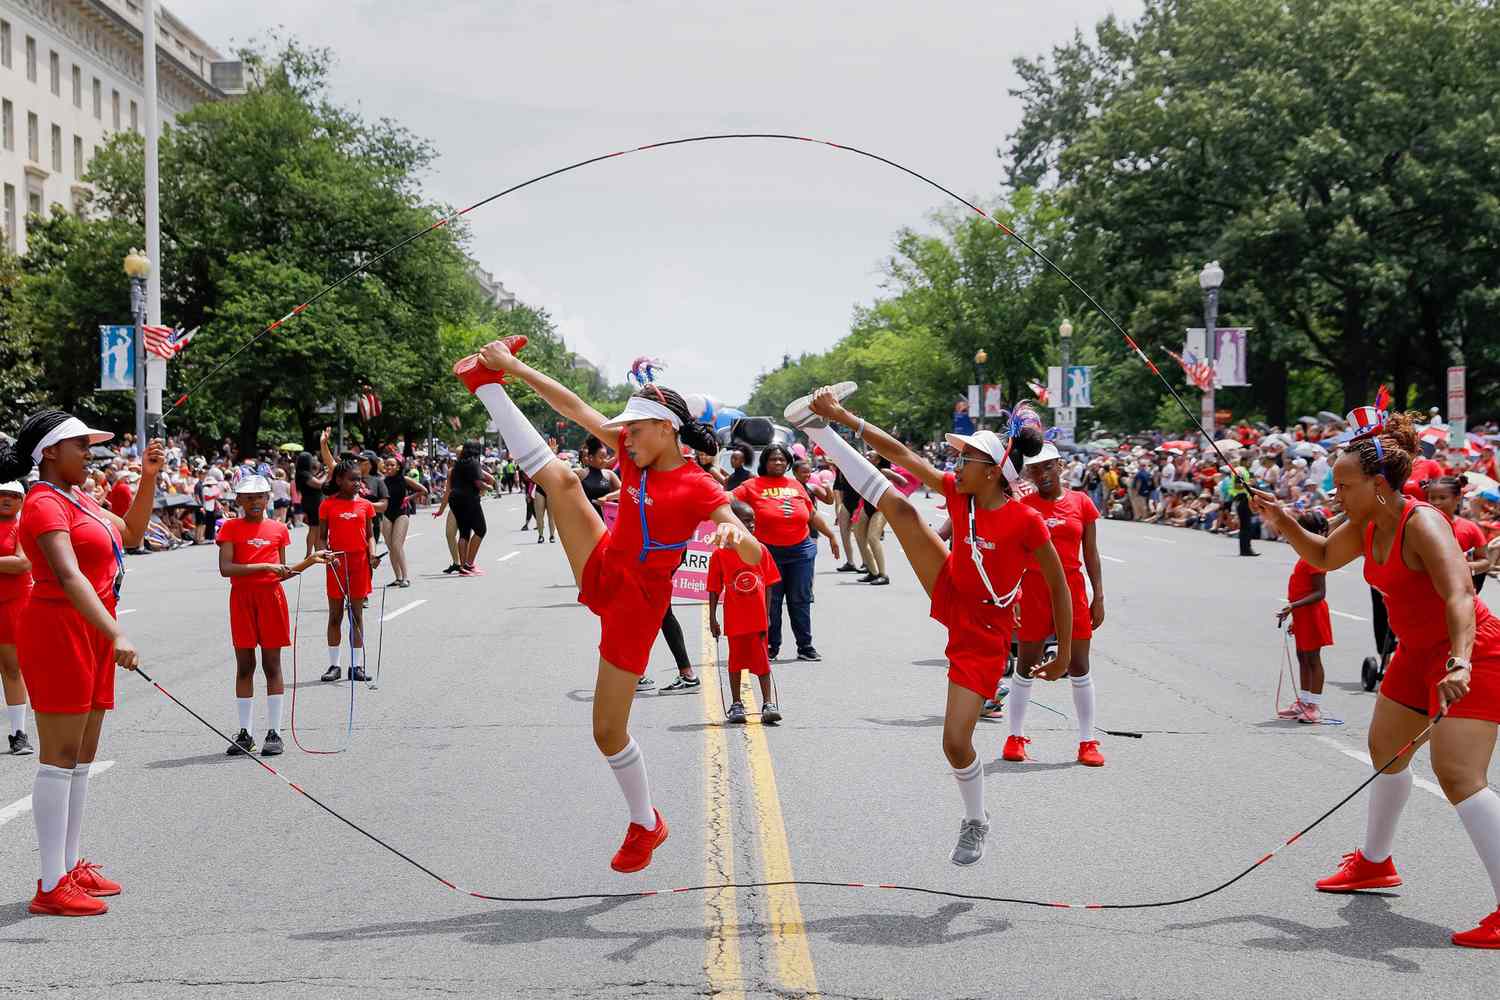 Fourth of July festivities on July 4, 2019 in Washington, DC